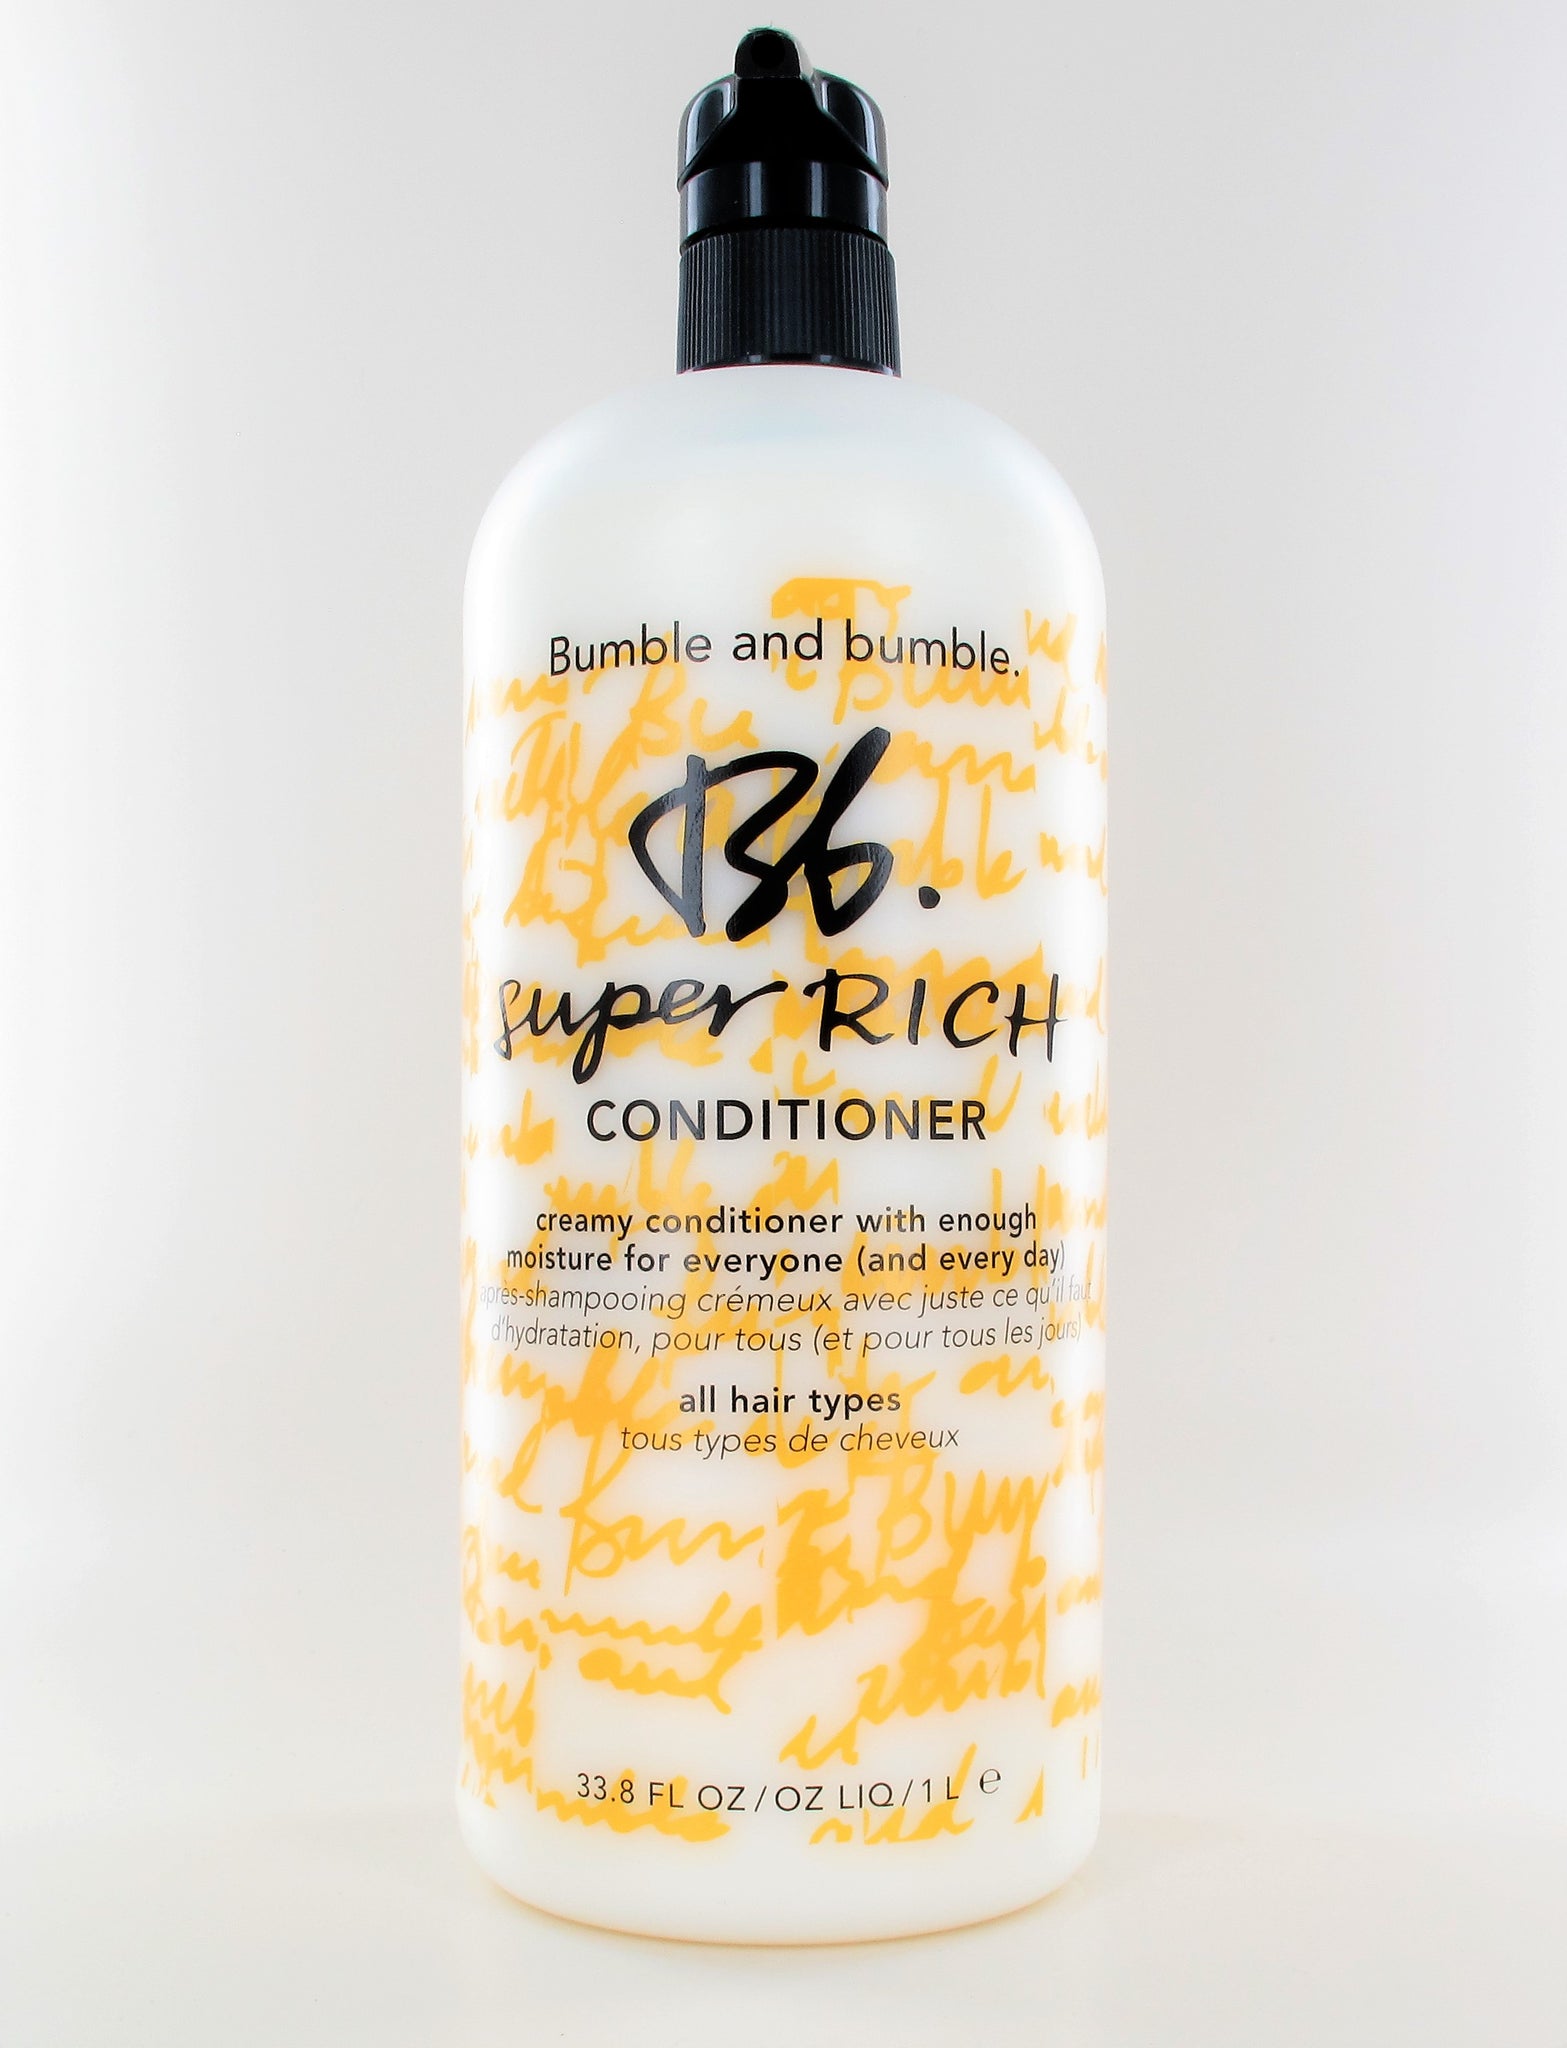 BUMBLE AND BUMBLE Super Rich Conditioner 33.8 oz